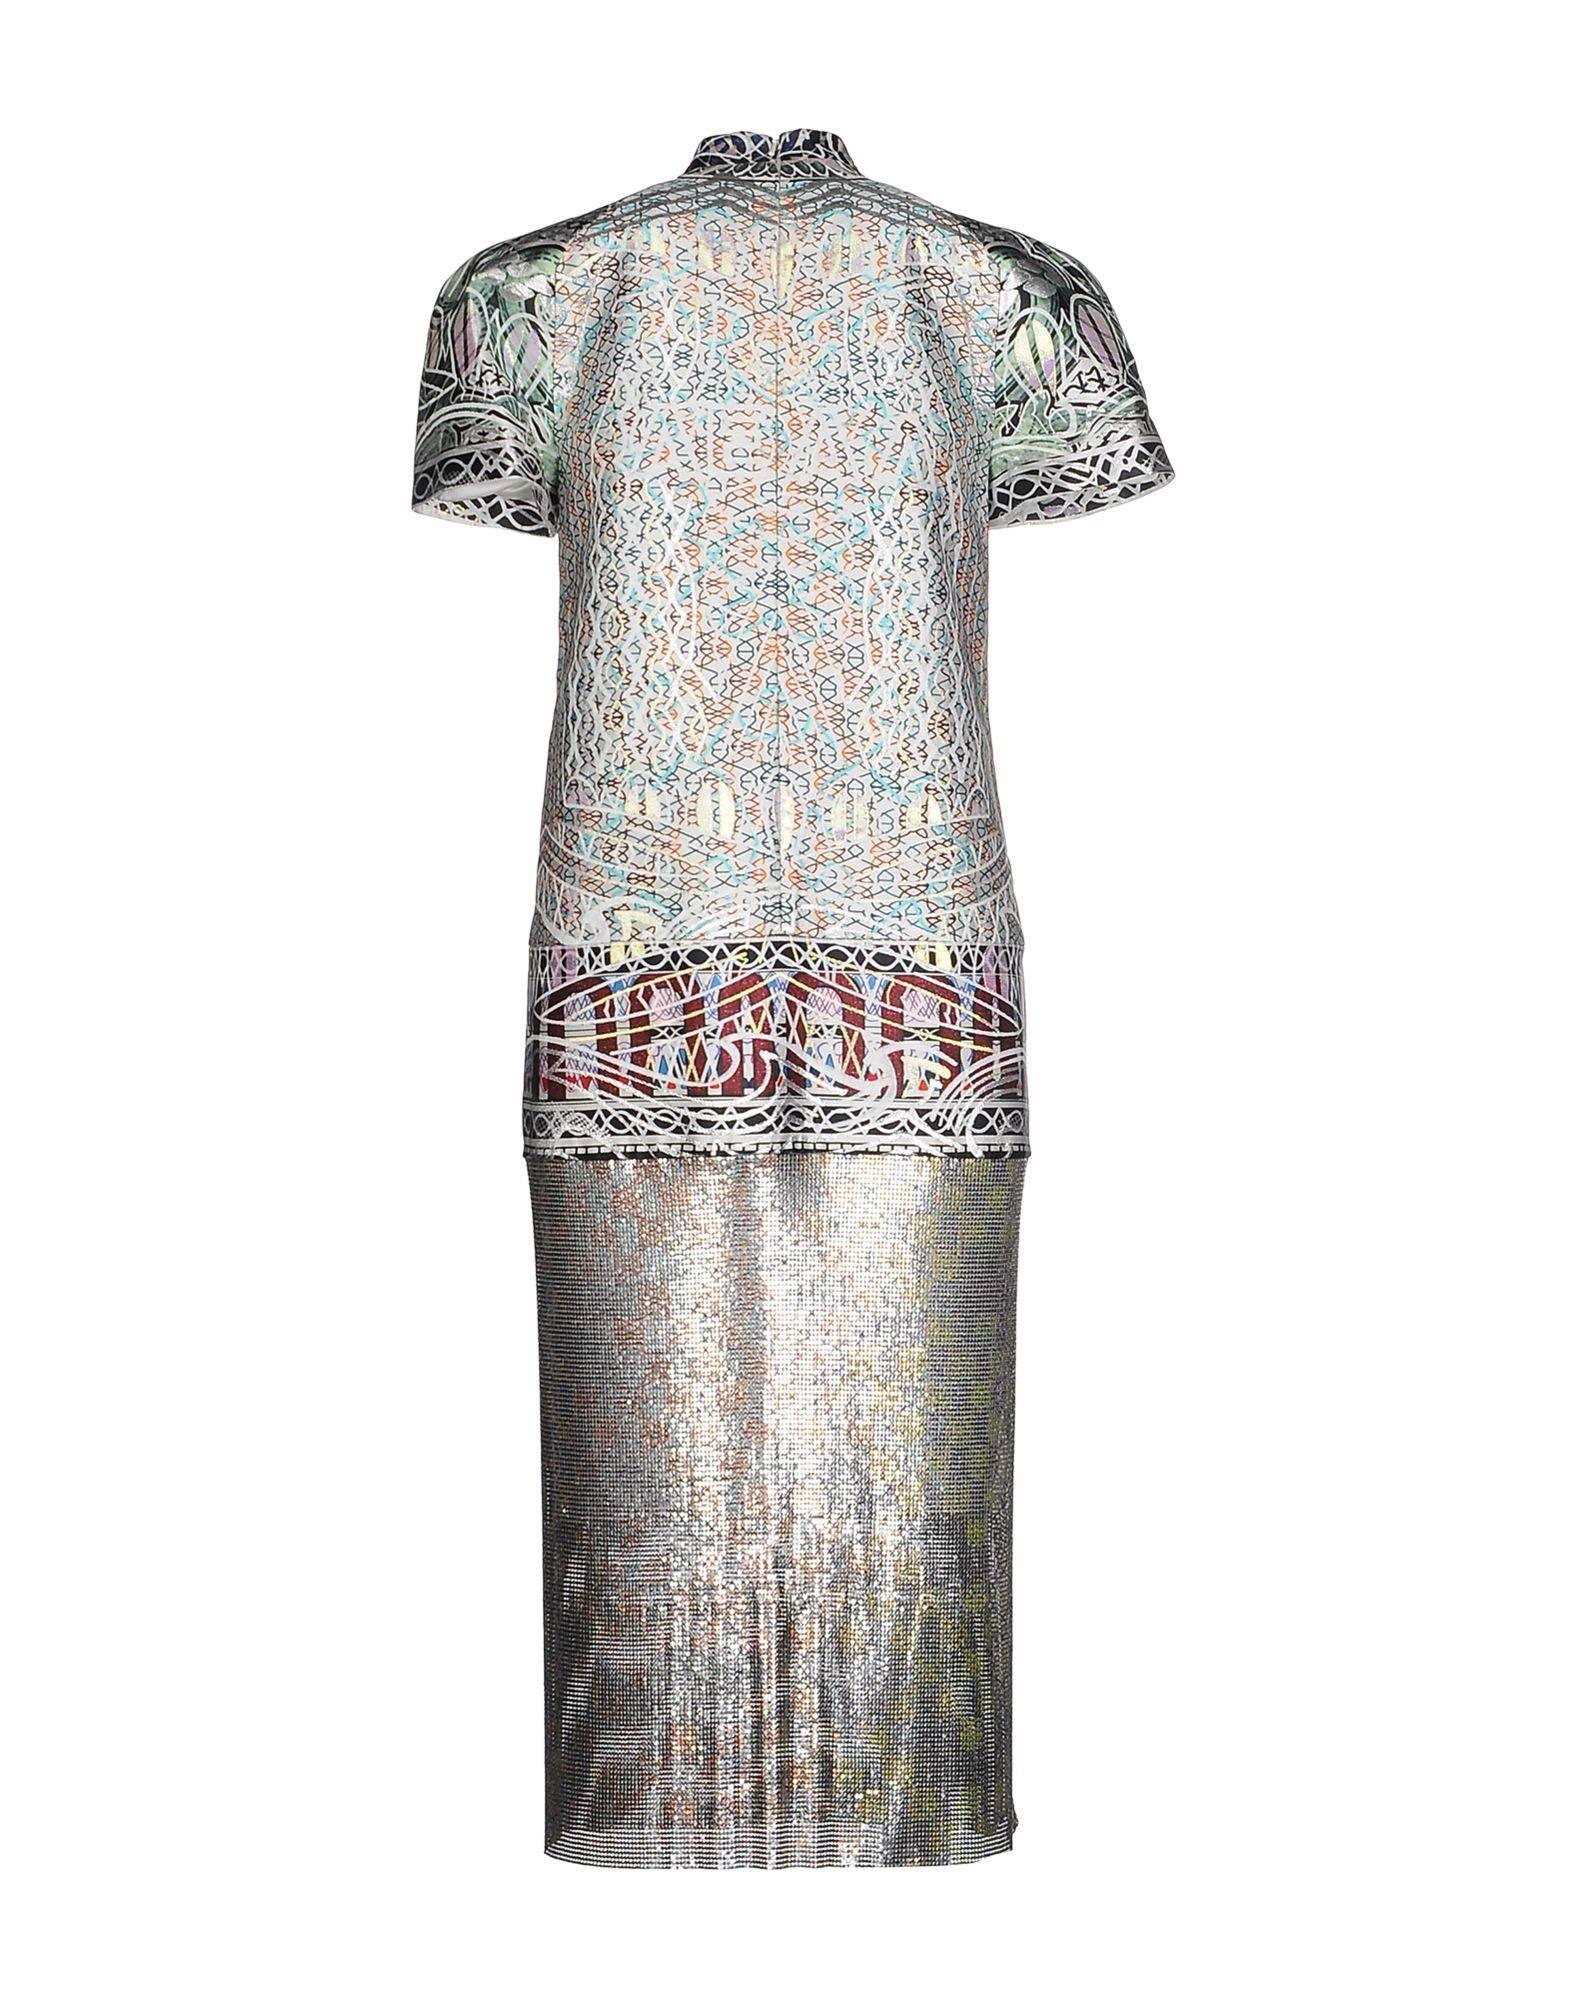 Mary Katrantzou continues to revolutionize feminine fashion with this intricately crafted 'Jigsaw' dress. 
The designer artfully combines metallic jacquard with hand-linked metal-mesh that has been printed with a Unique Heat Transfer Process.